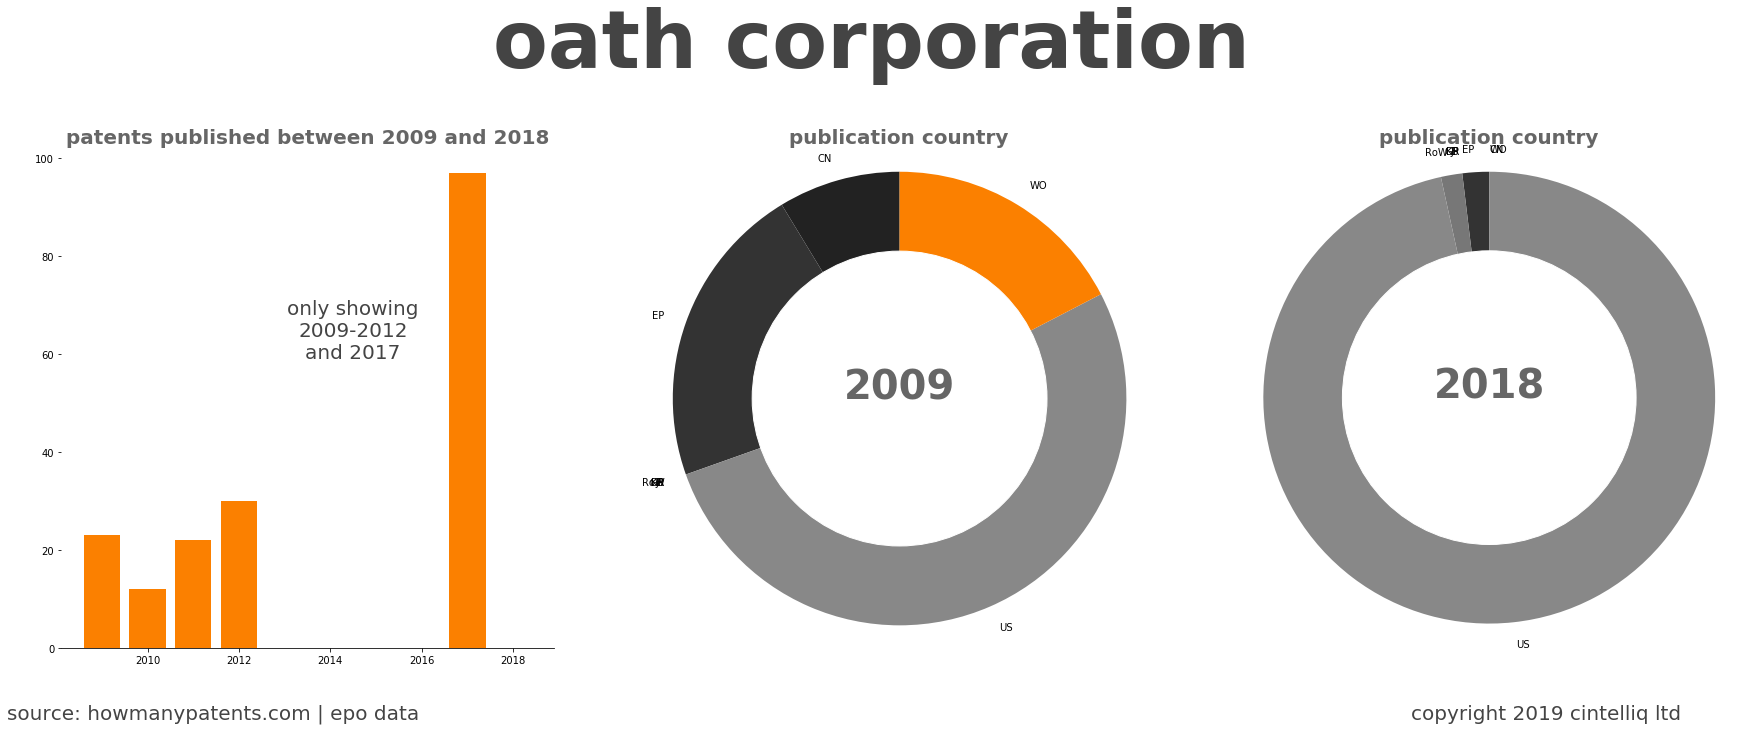 summary of patents for Oath Corporation